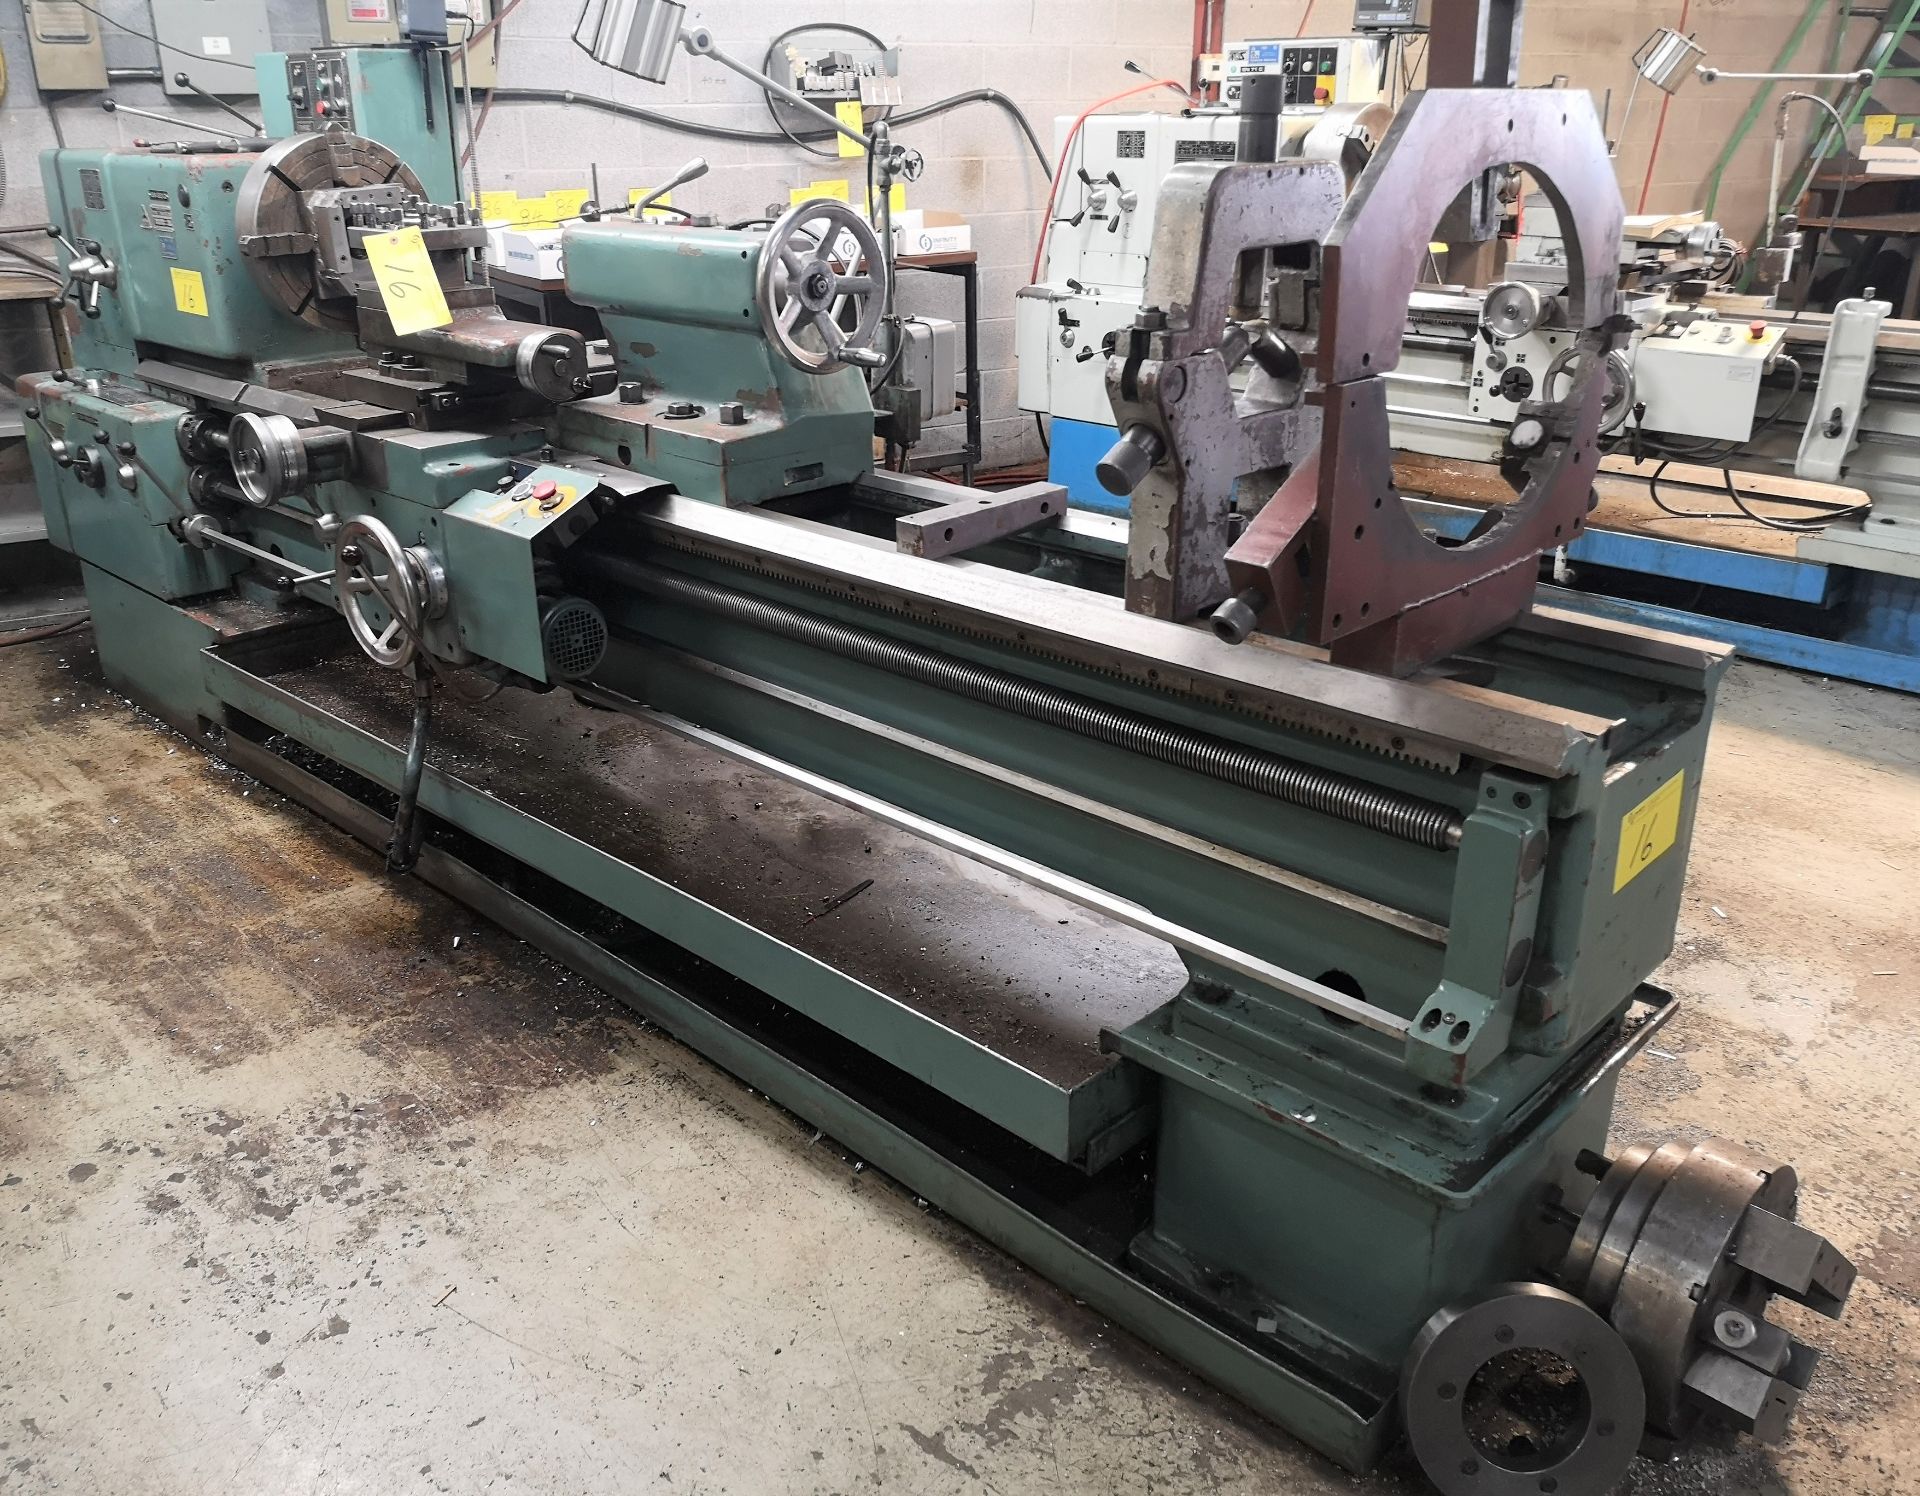 TOS SN63C Lathe, 25” x 80”, Mitutoyo 2-Axis DRO, 16” 4-Jaw Chuck, 4” Bore, Speeds to 1,000 RPM, - Image 14 of 15